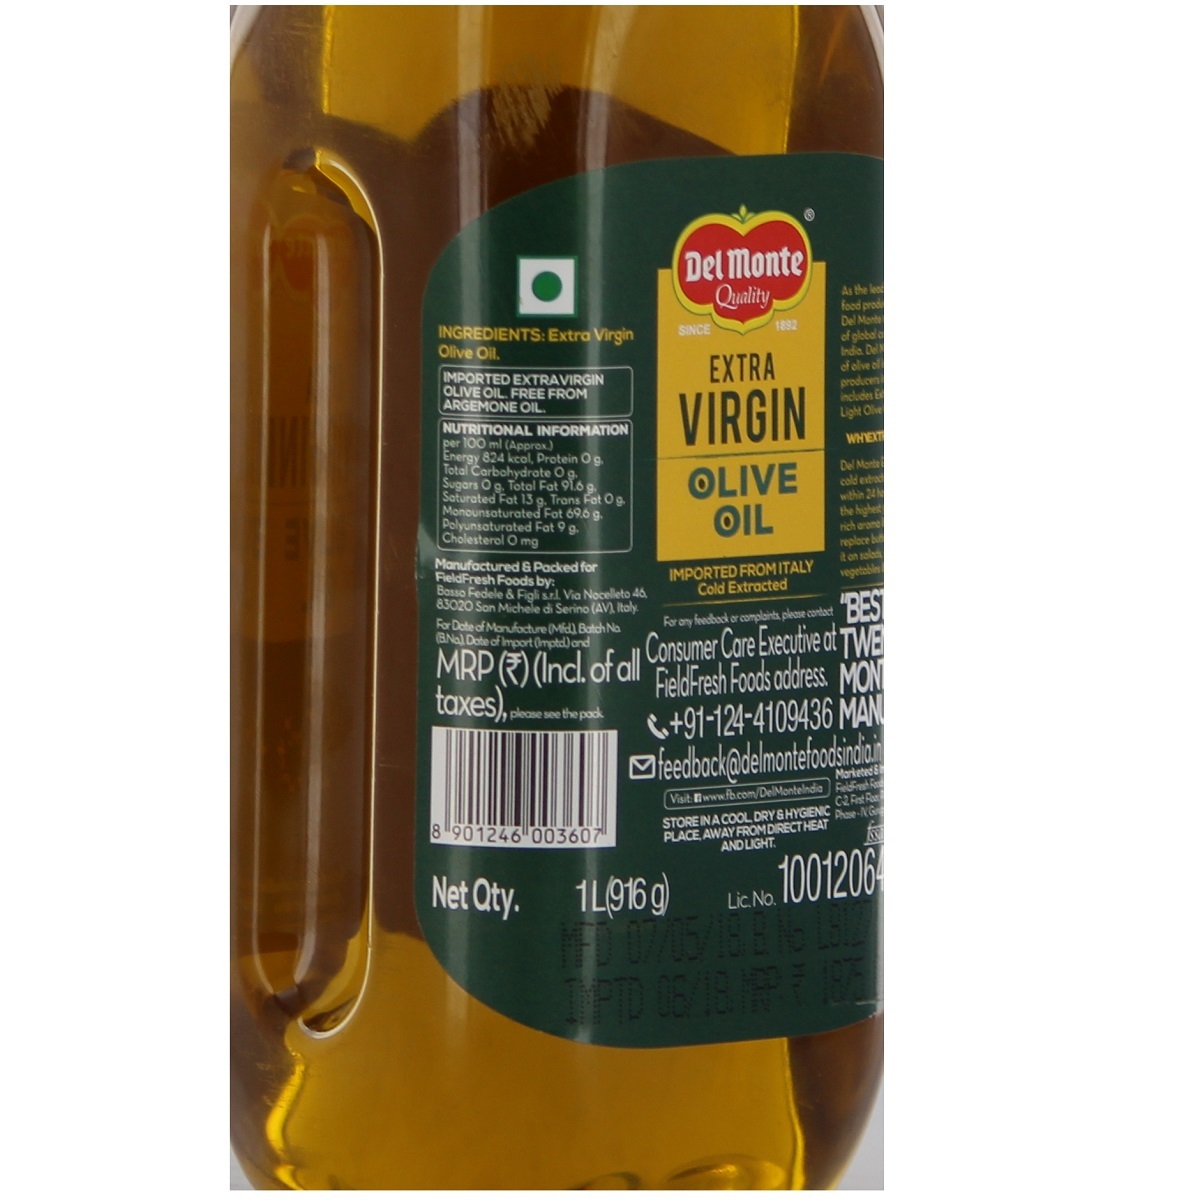 Delmonte Quality Extra Virgin Olive Oil 1Litre